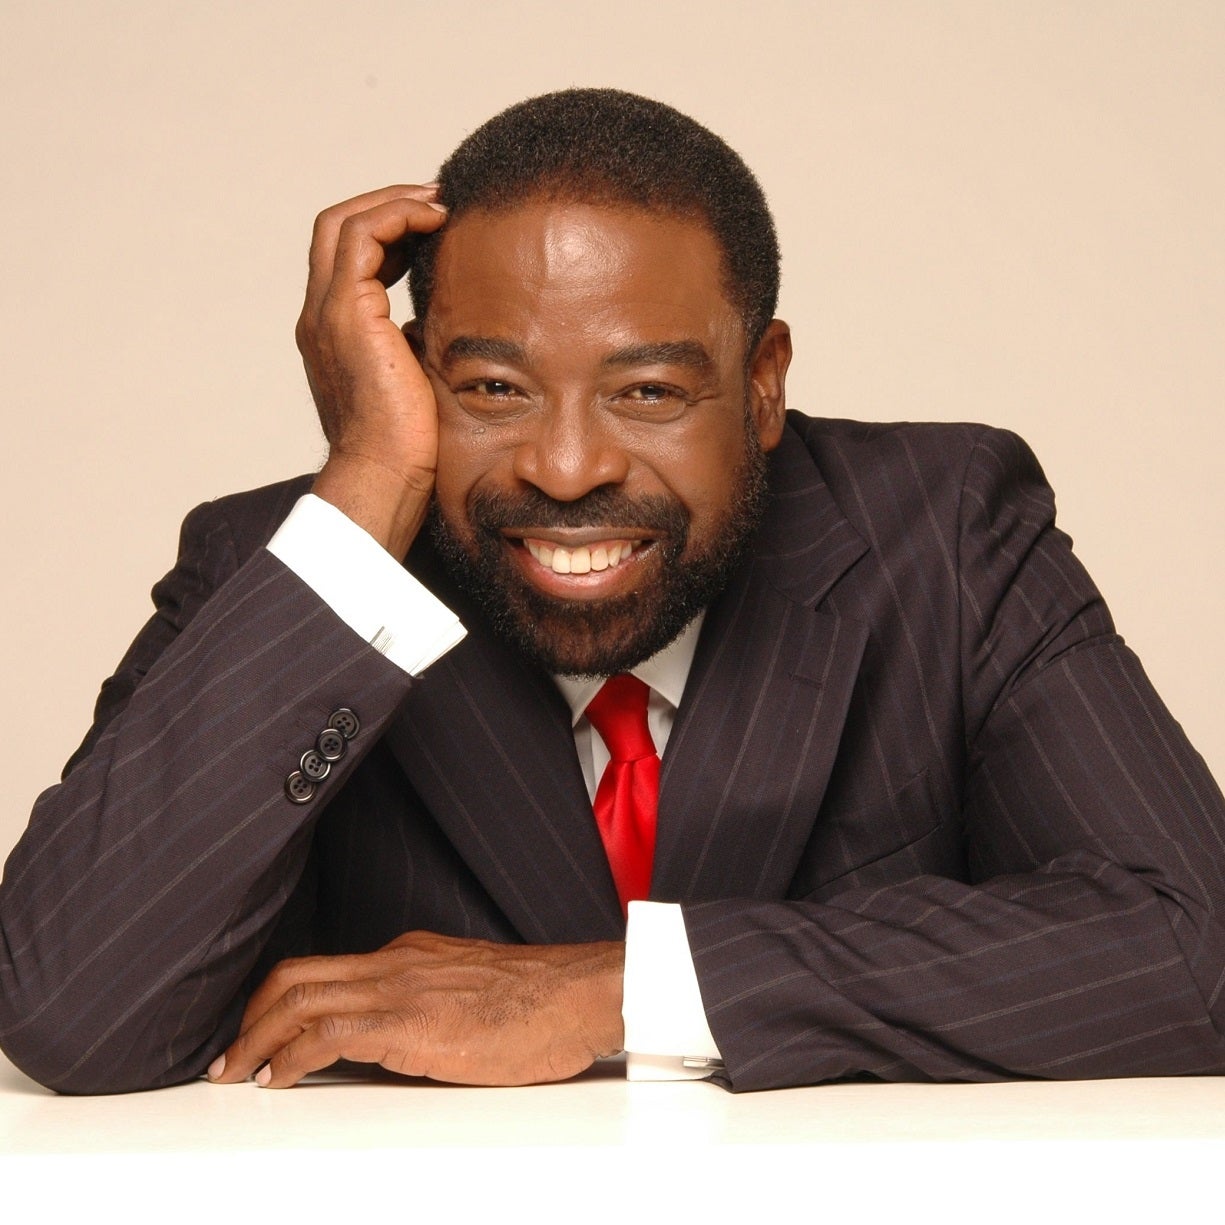 The 78-year old son of father (?) and mother(?) Les Brown in 2023 photo. Les Brown earned a  million dollar salary - leaving the net worth at  million in 2023